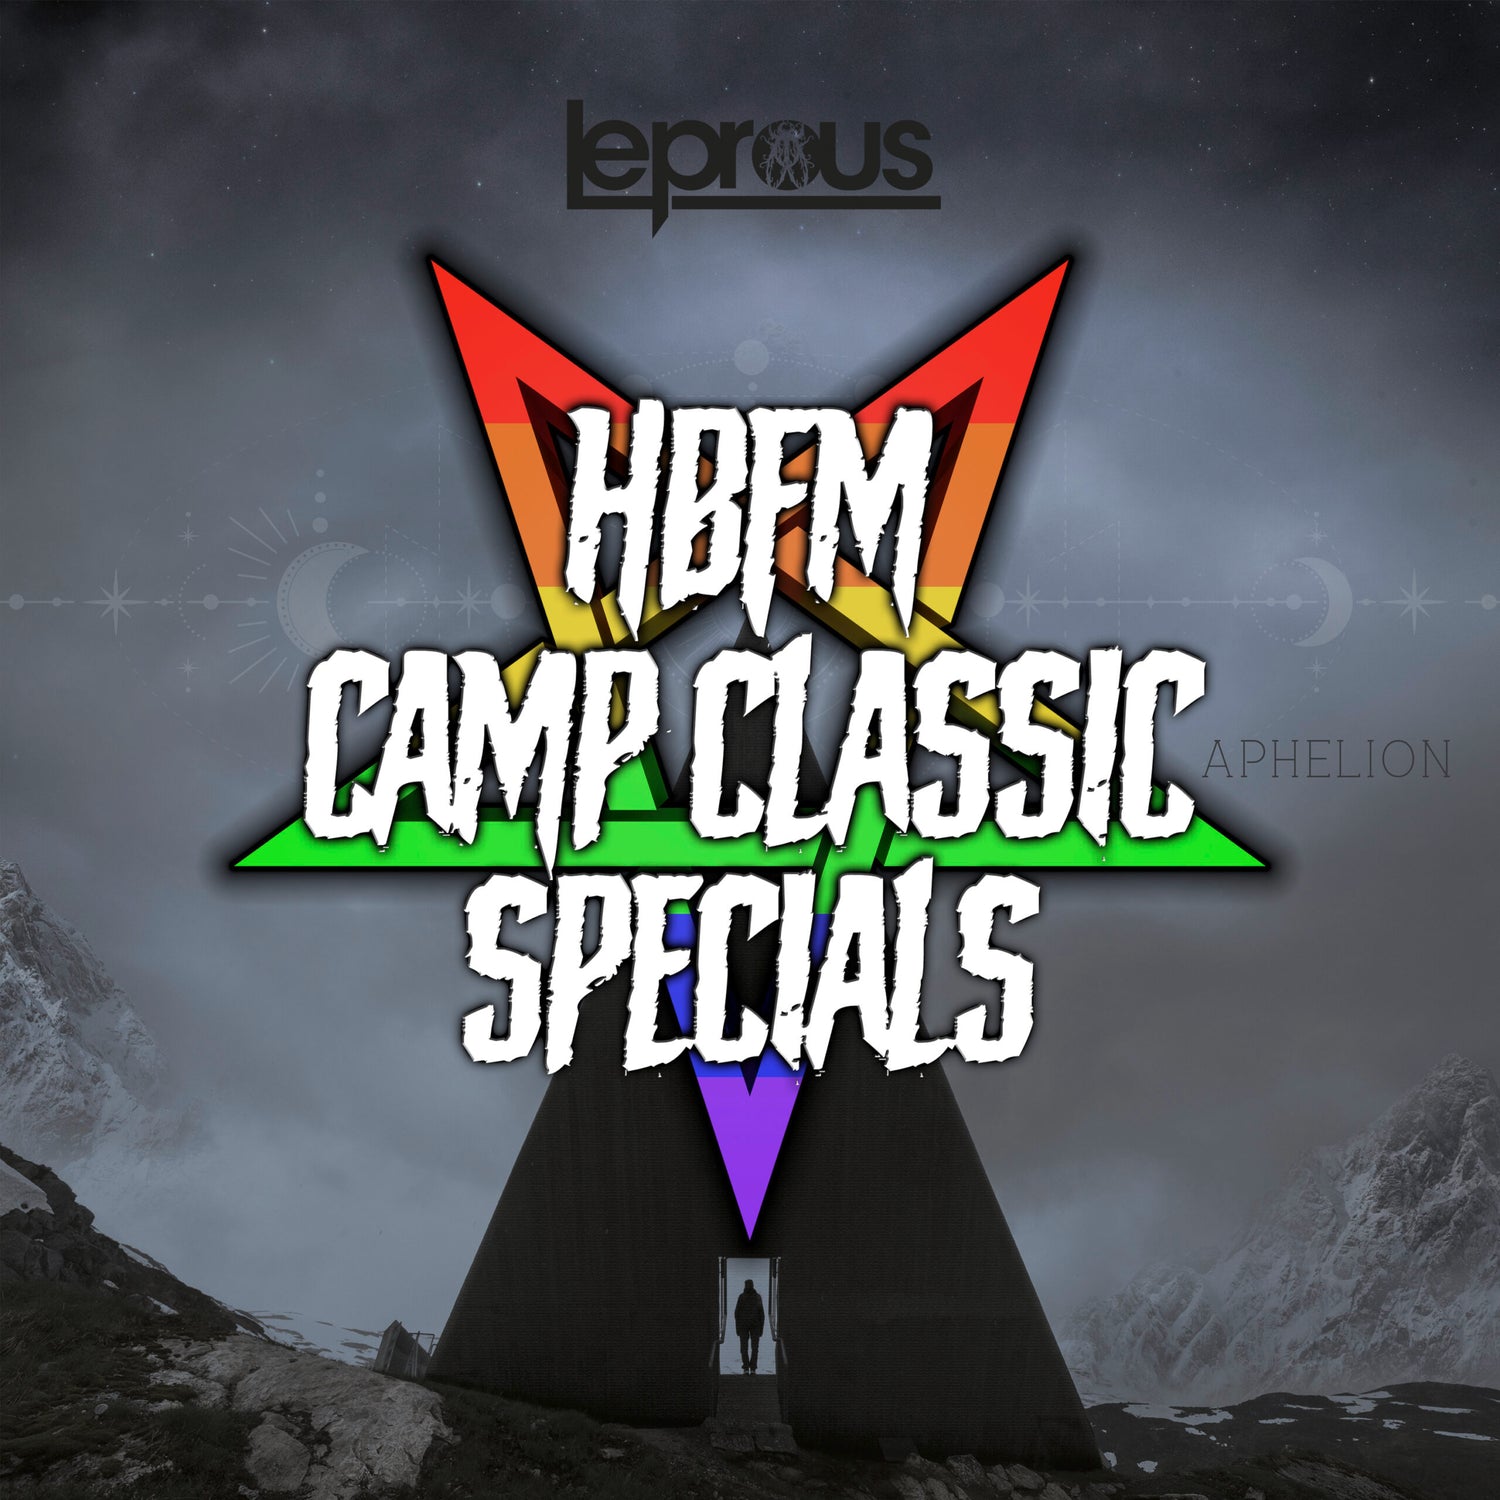 HBFM explore "On Hold" by Leprous' queer relevance on their new special